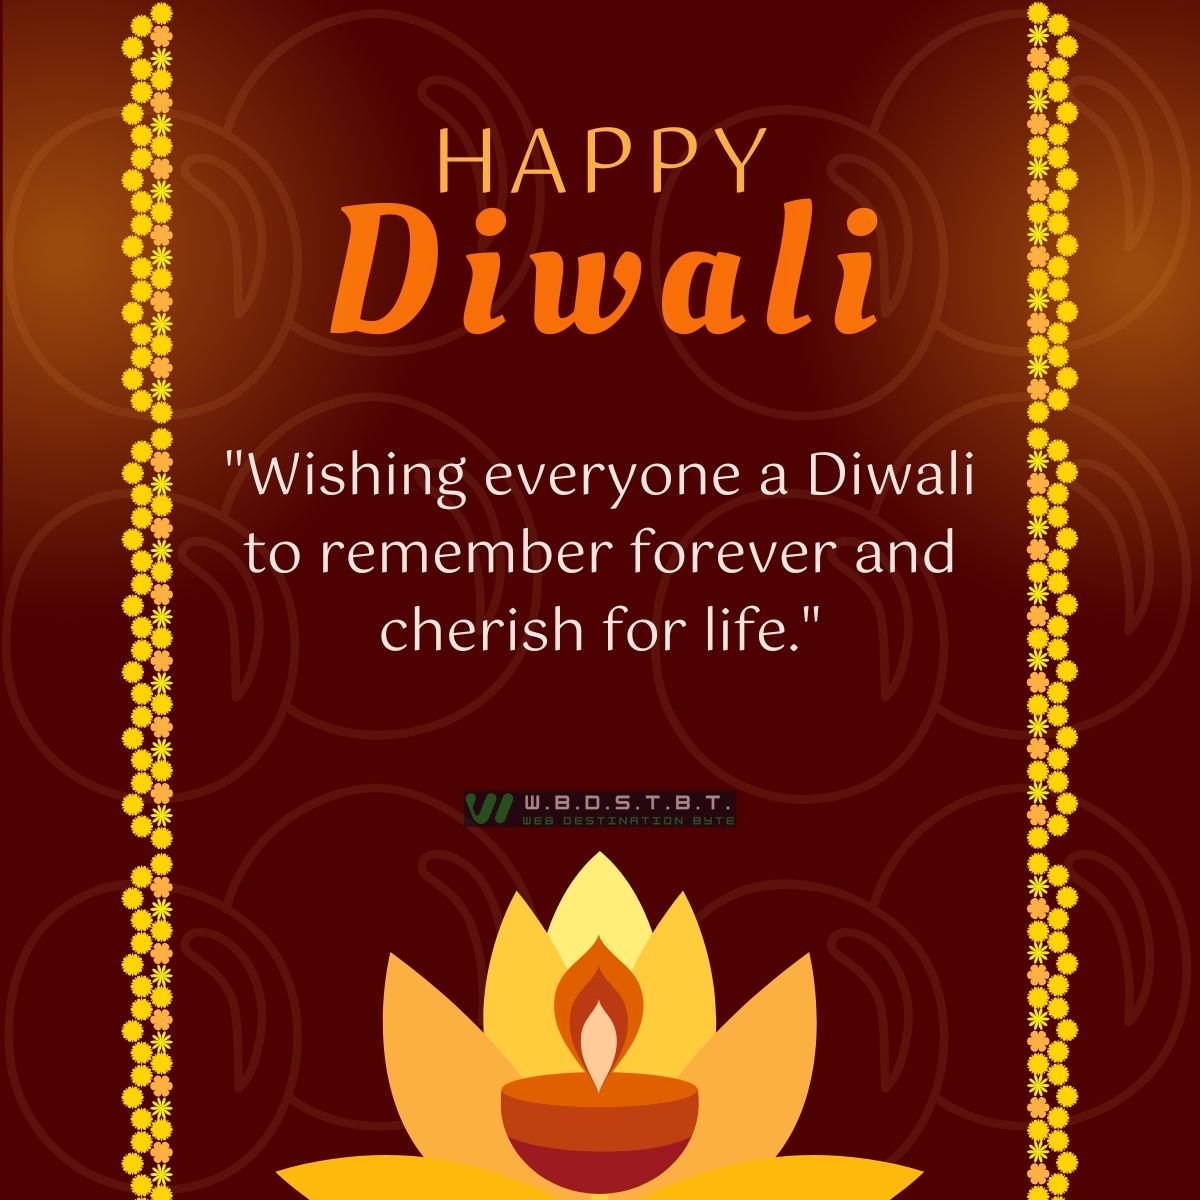 "Wishing everyone a Diwali to remember forever and cherish for life."